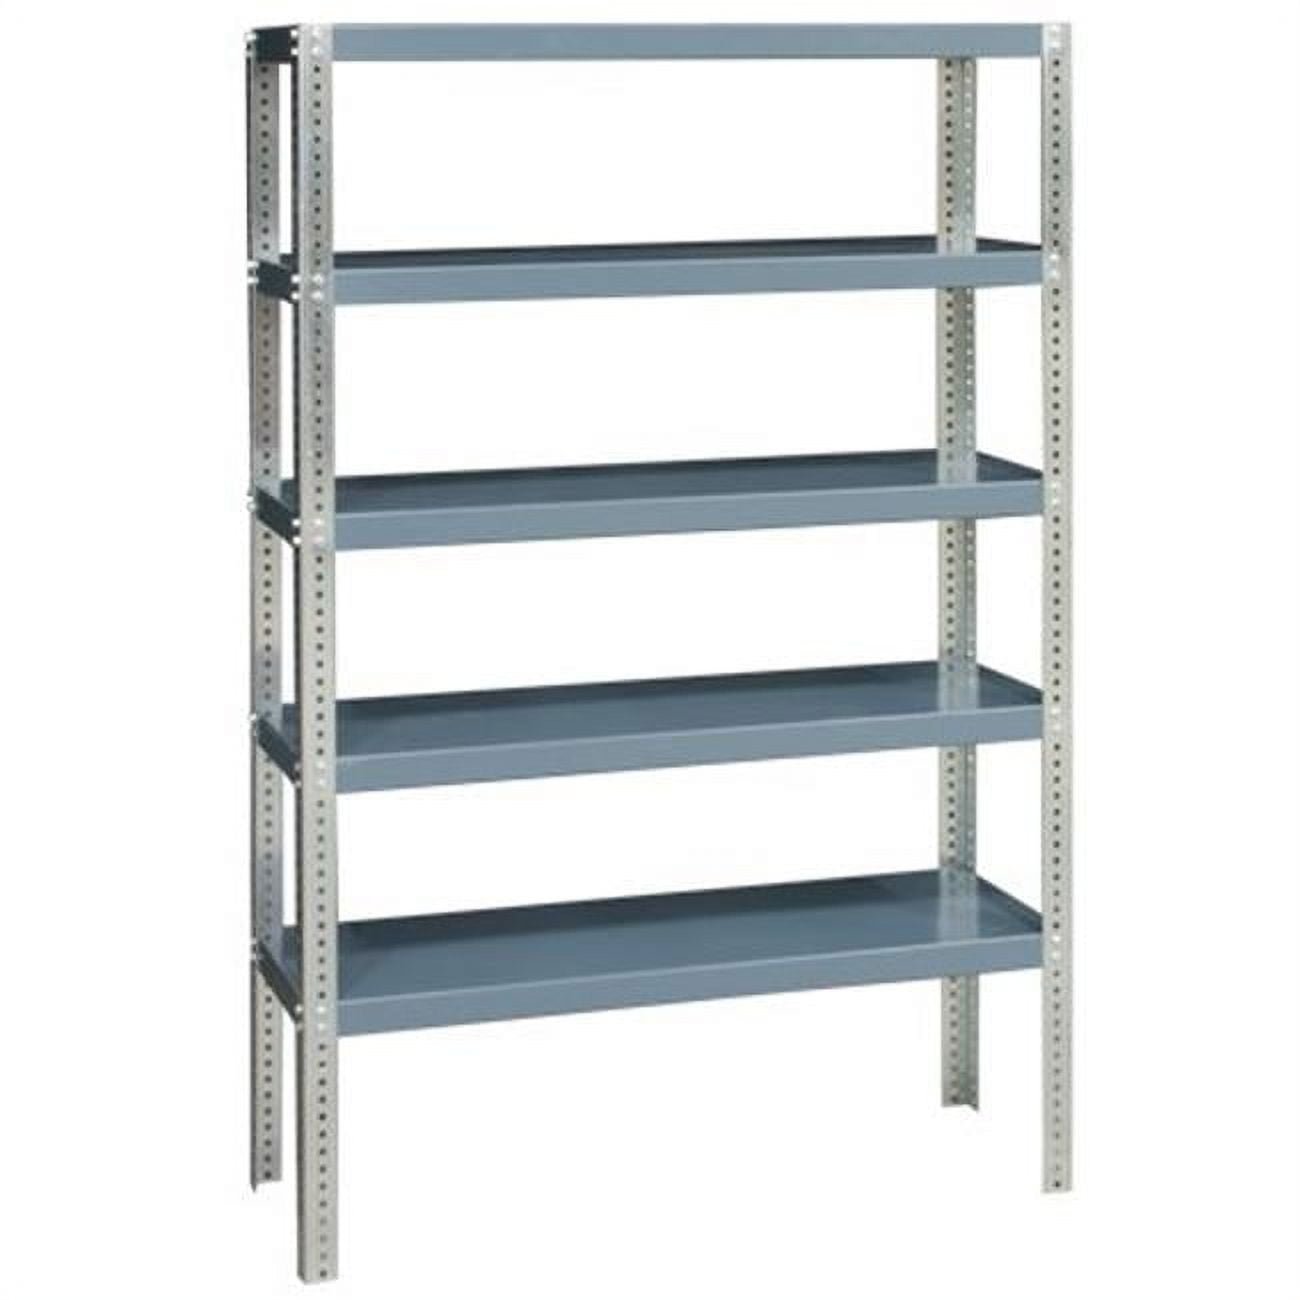 Picture of Durham HDS-246072-95 72 in. High Heavy Duty Shelving, Gray